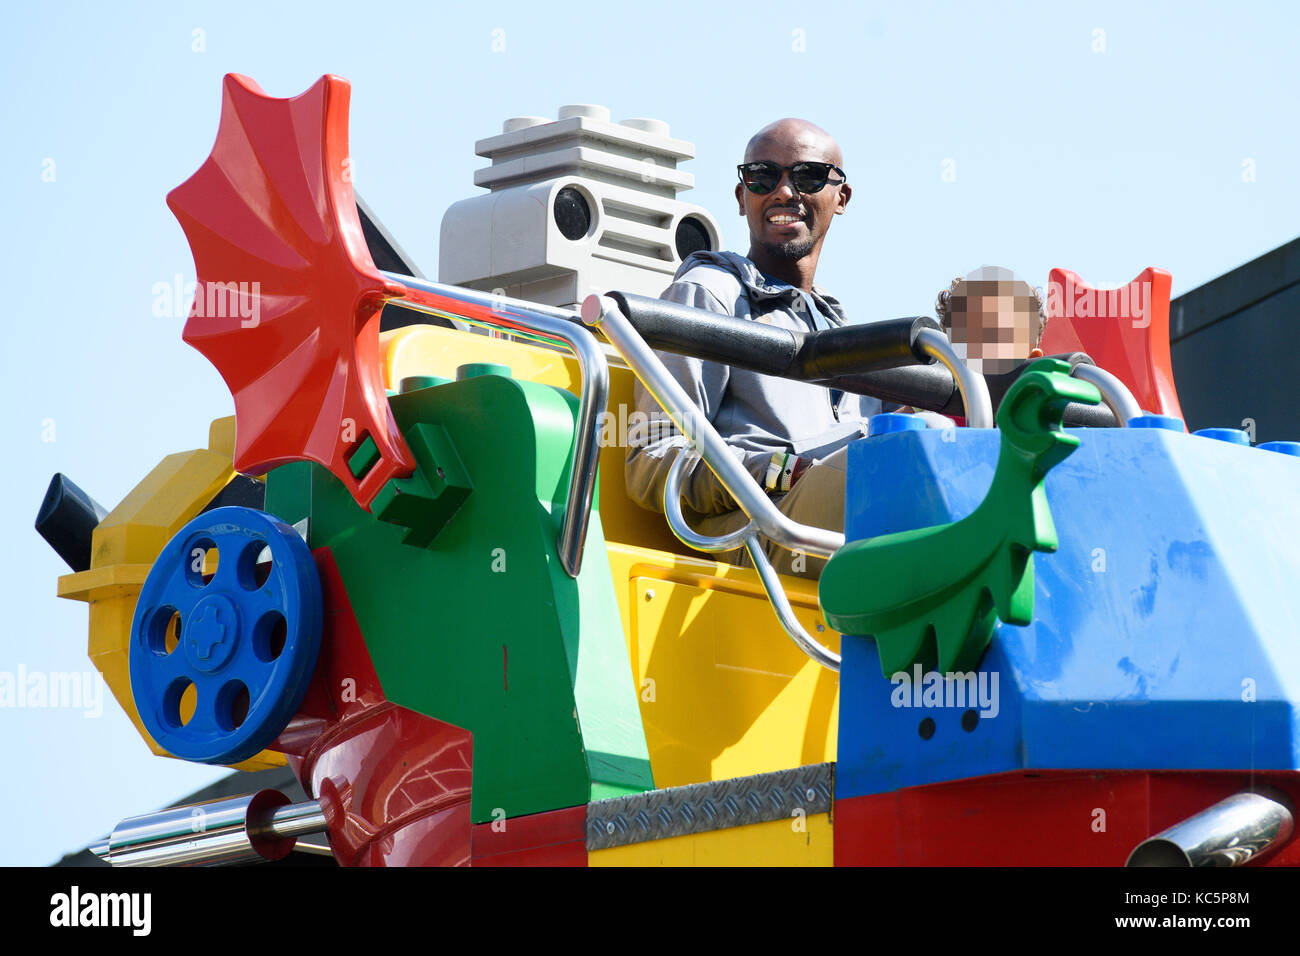 Mo Farah out and about in Legoland resort Windsor with his family earlier today  Featuring: Mo Farah, Hussein Farah Where: Windsor, United Kingdom When: 01 Sep 2017 Credit: WENN.com Stock Photo